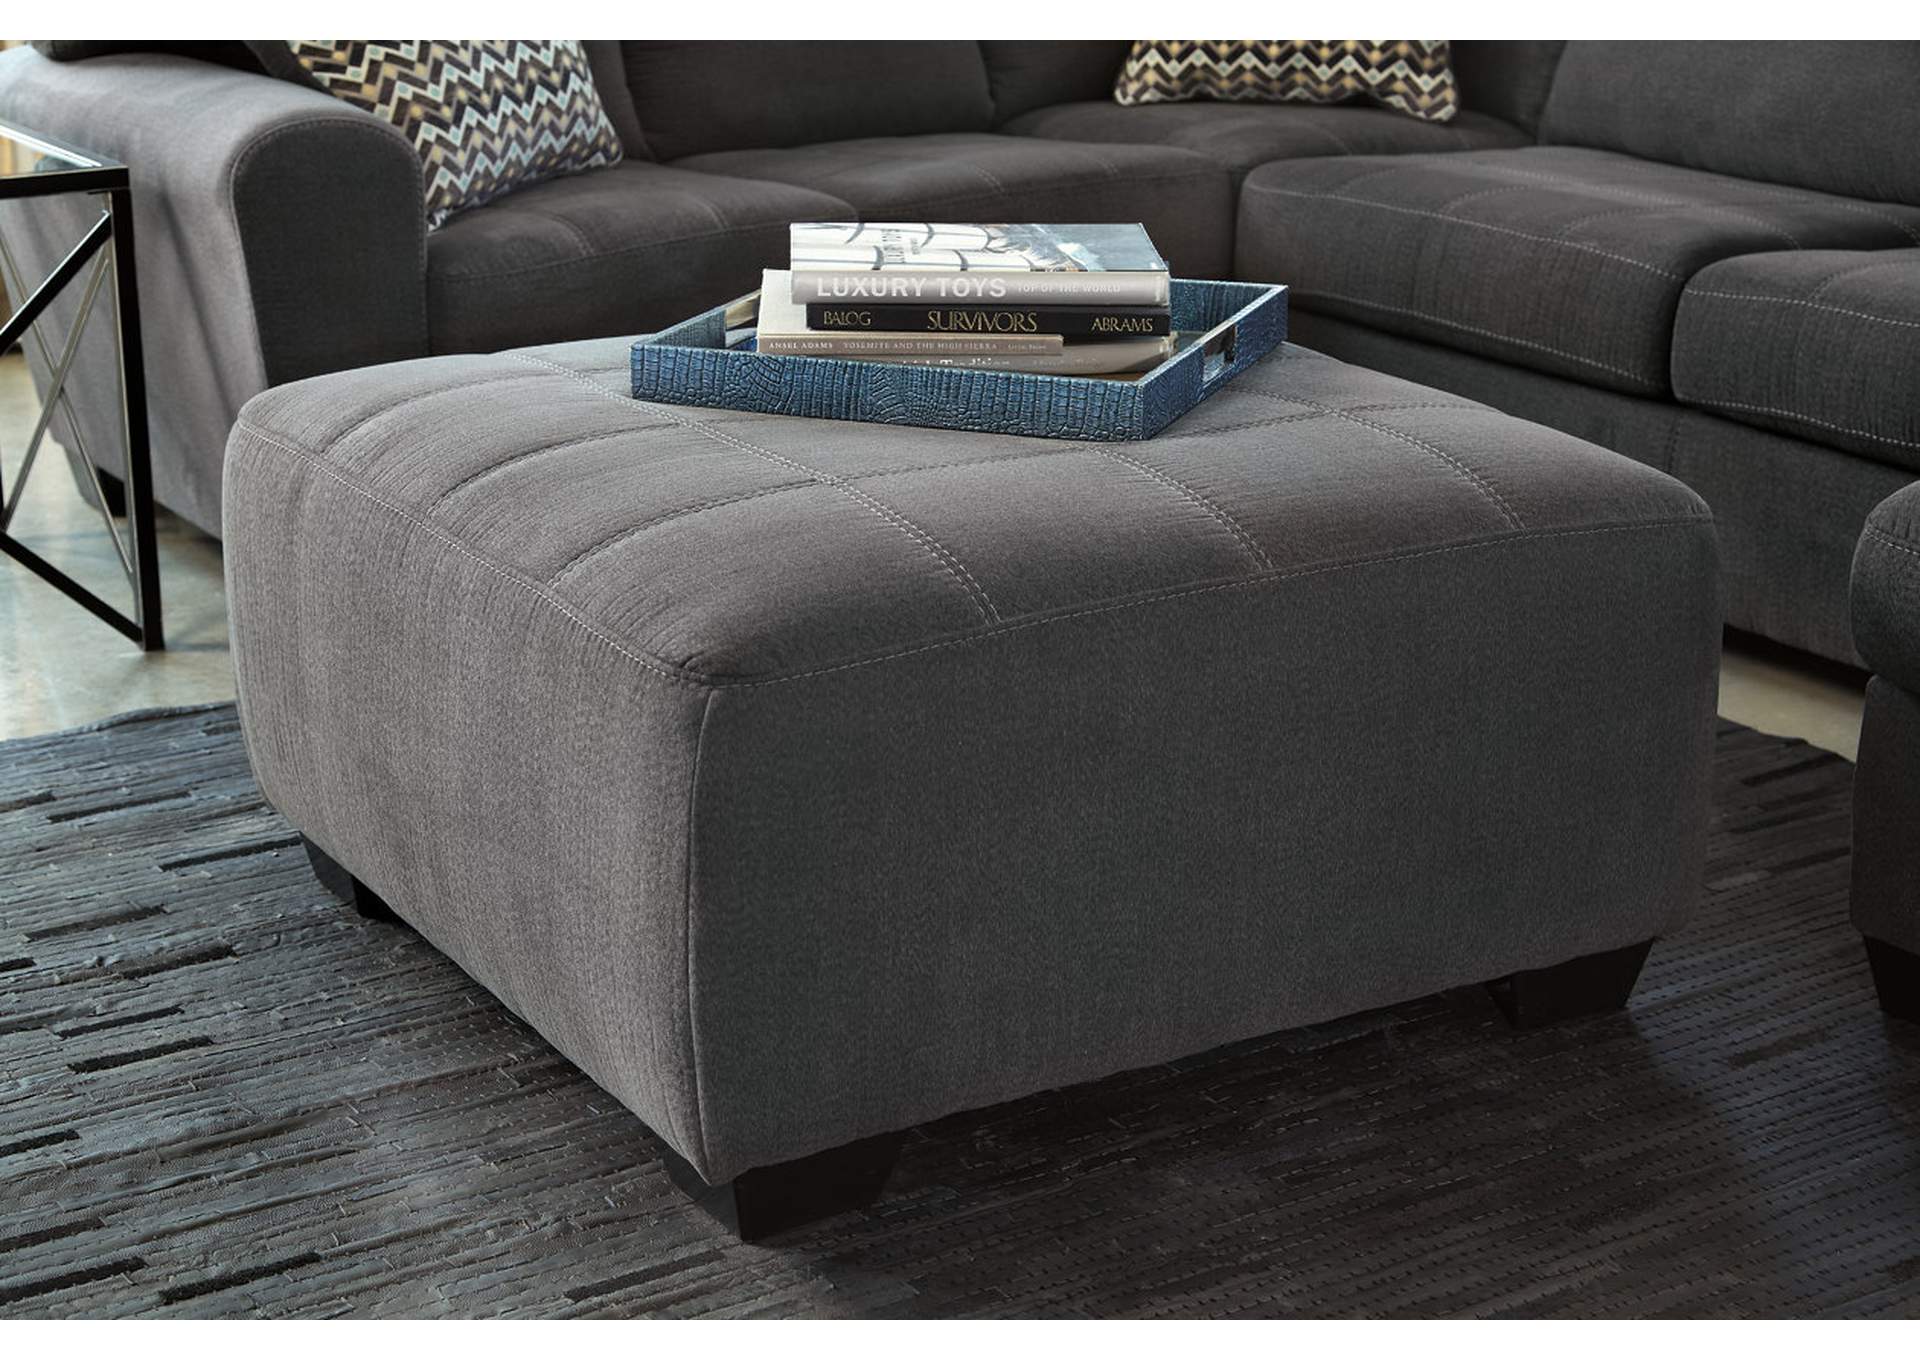 Ambee 3-Piece Sectional with Ottoman,Benchcraft